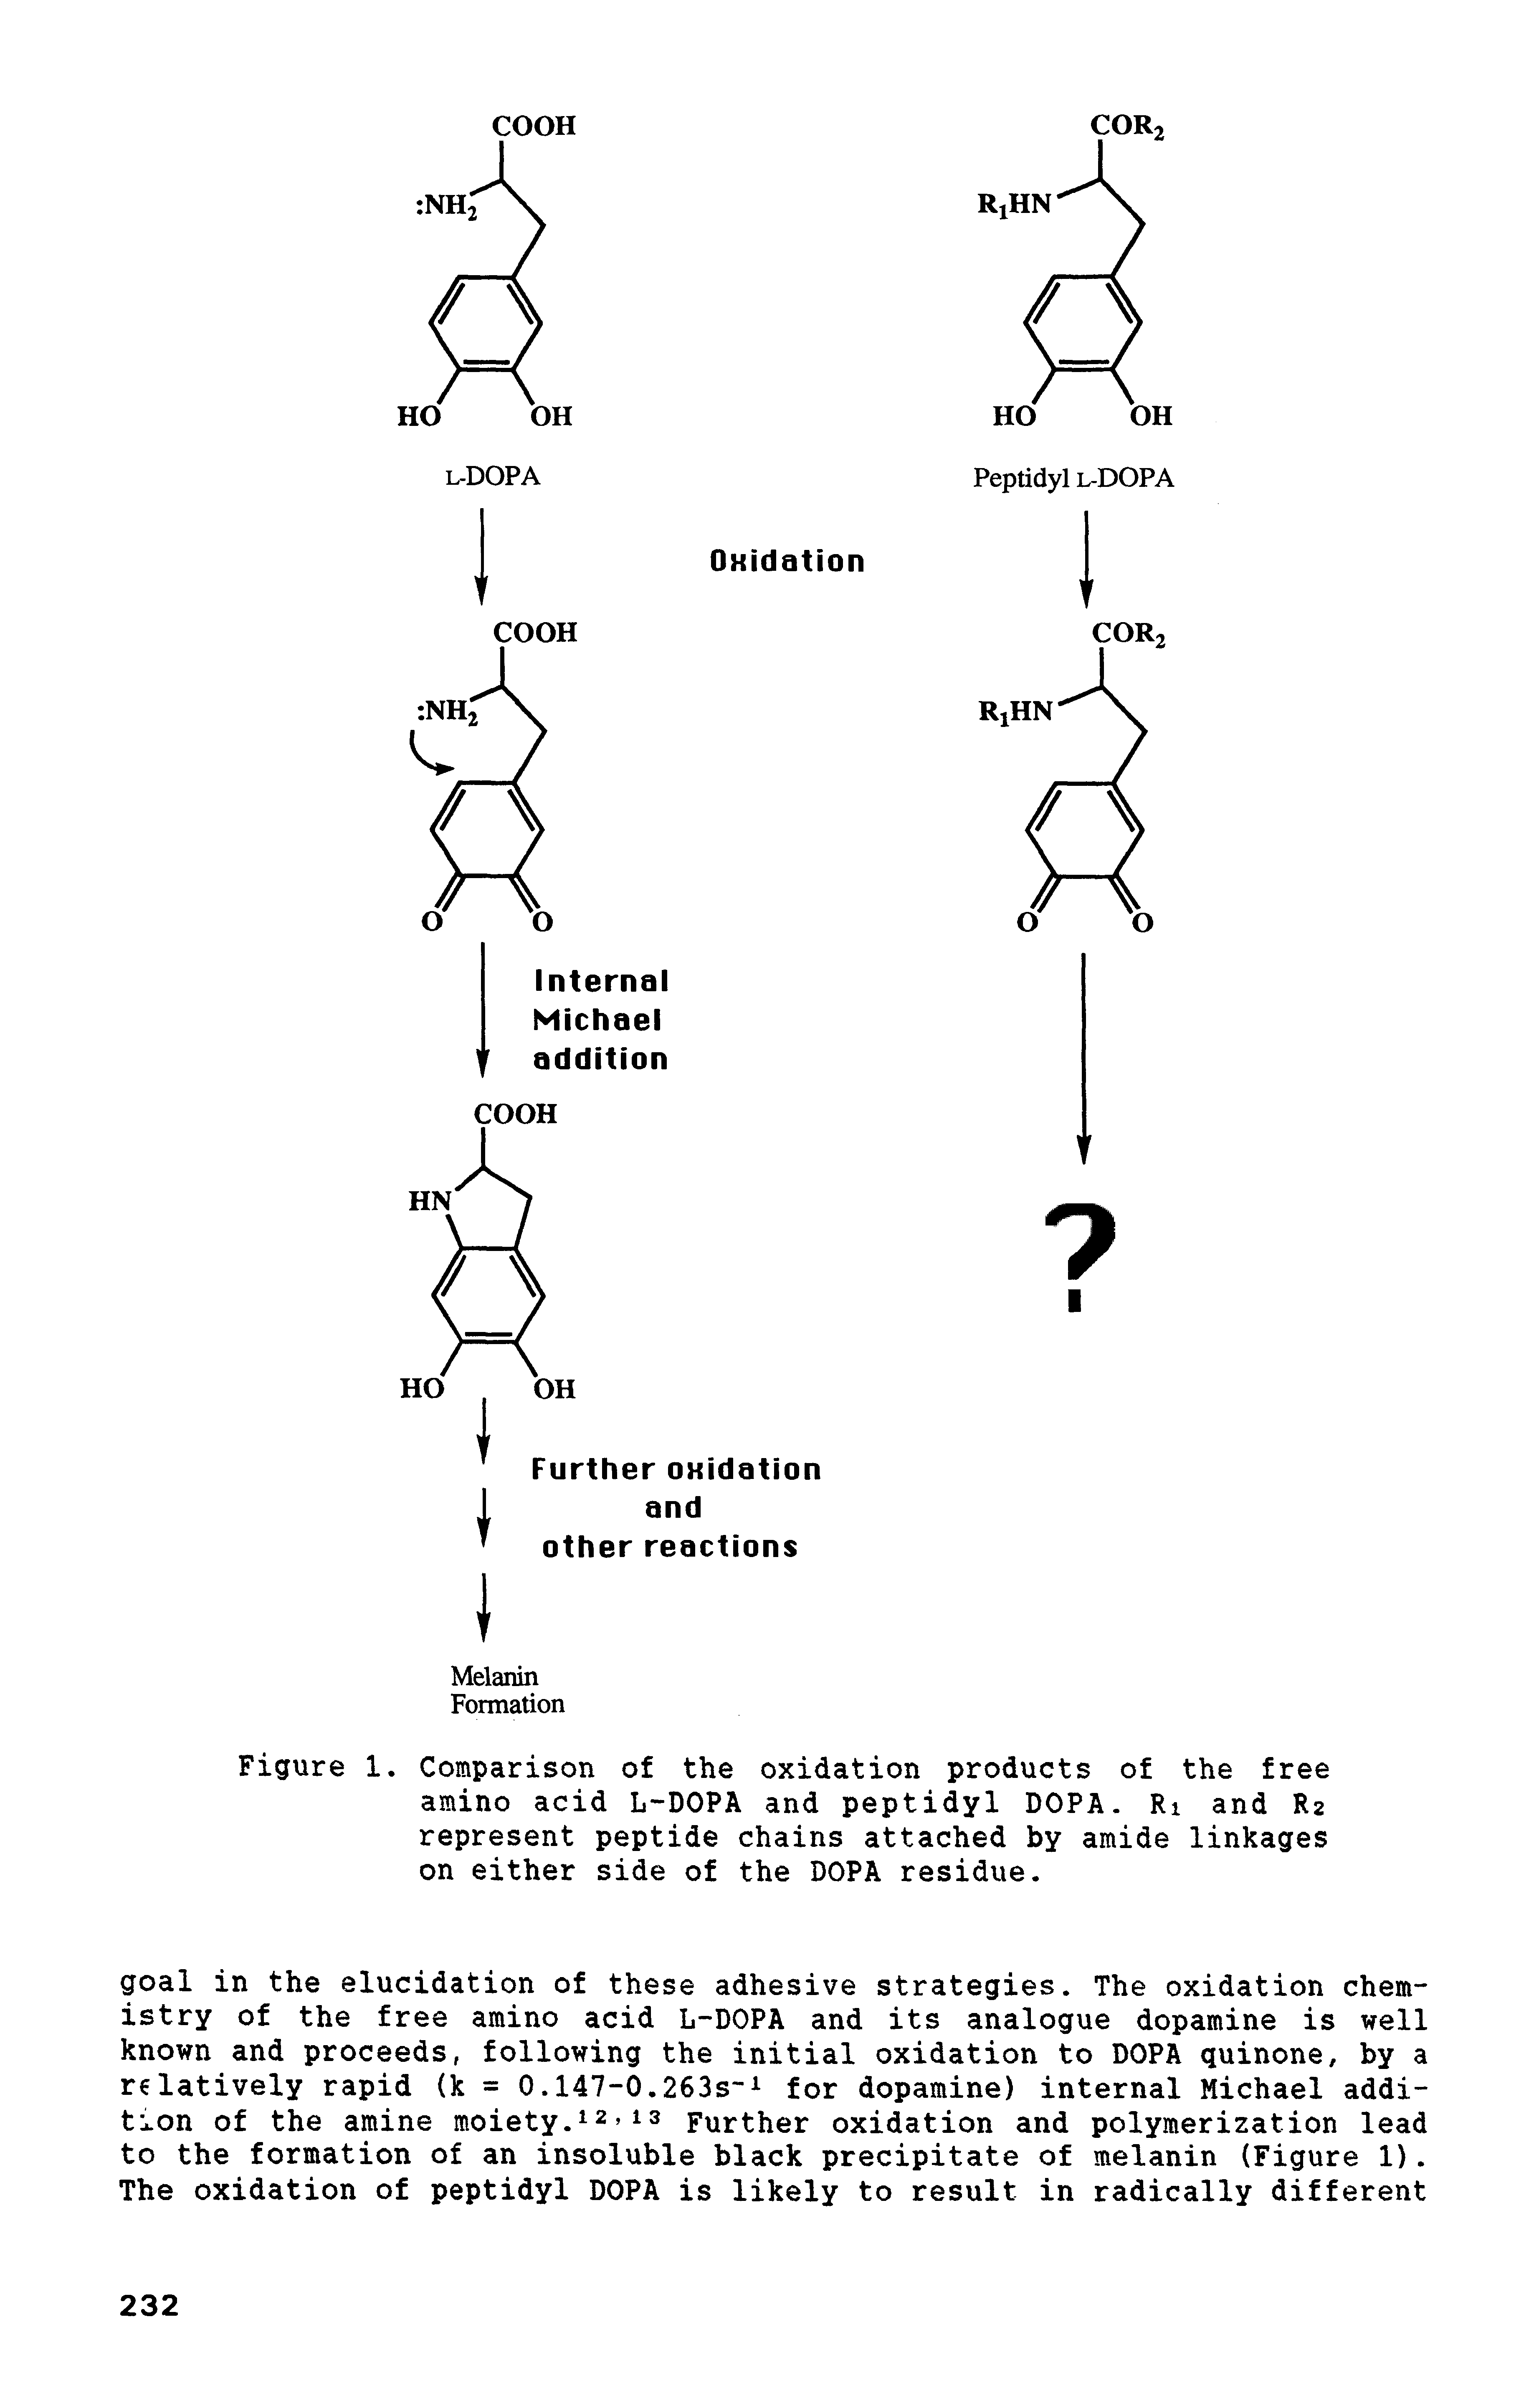 Figure 1. Comparison of the oxidation products of the free amino acid L-DOPA and peptidyl DOPA. Ri and R2 represent peptide chains attached by amide linkages on either side of the DOPA residue.